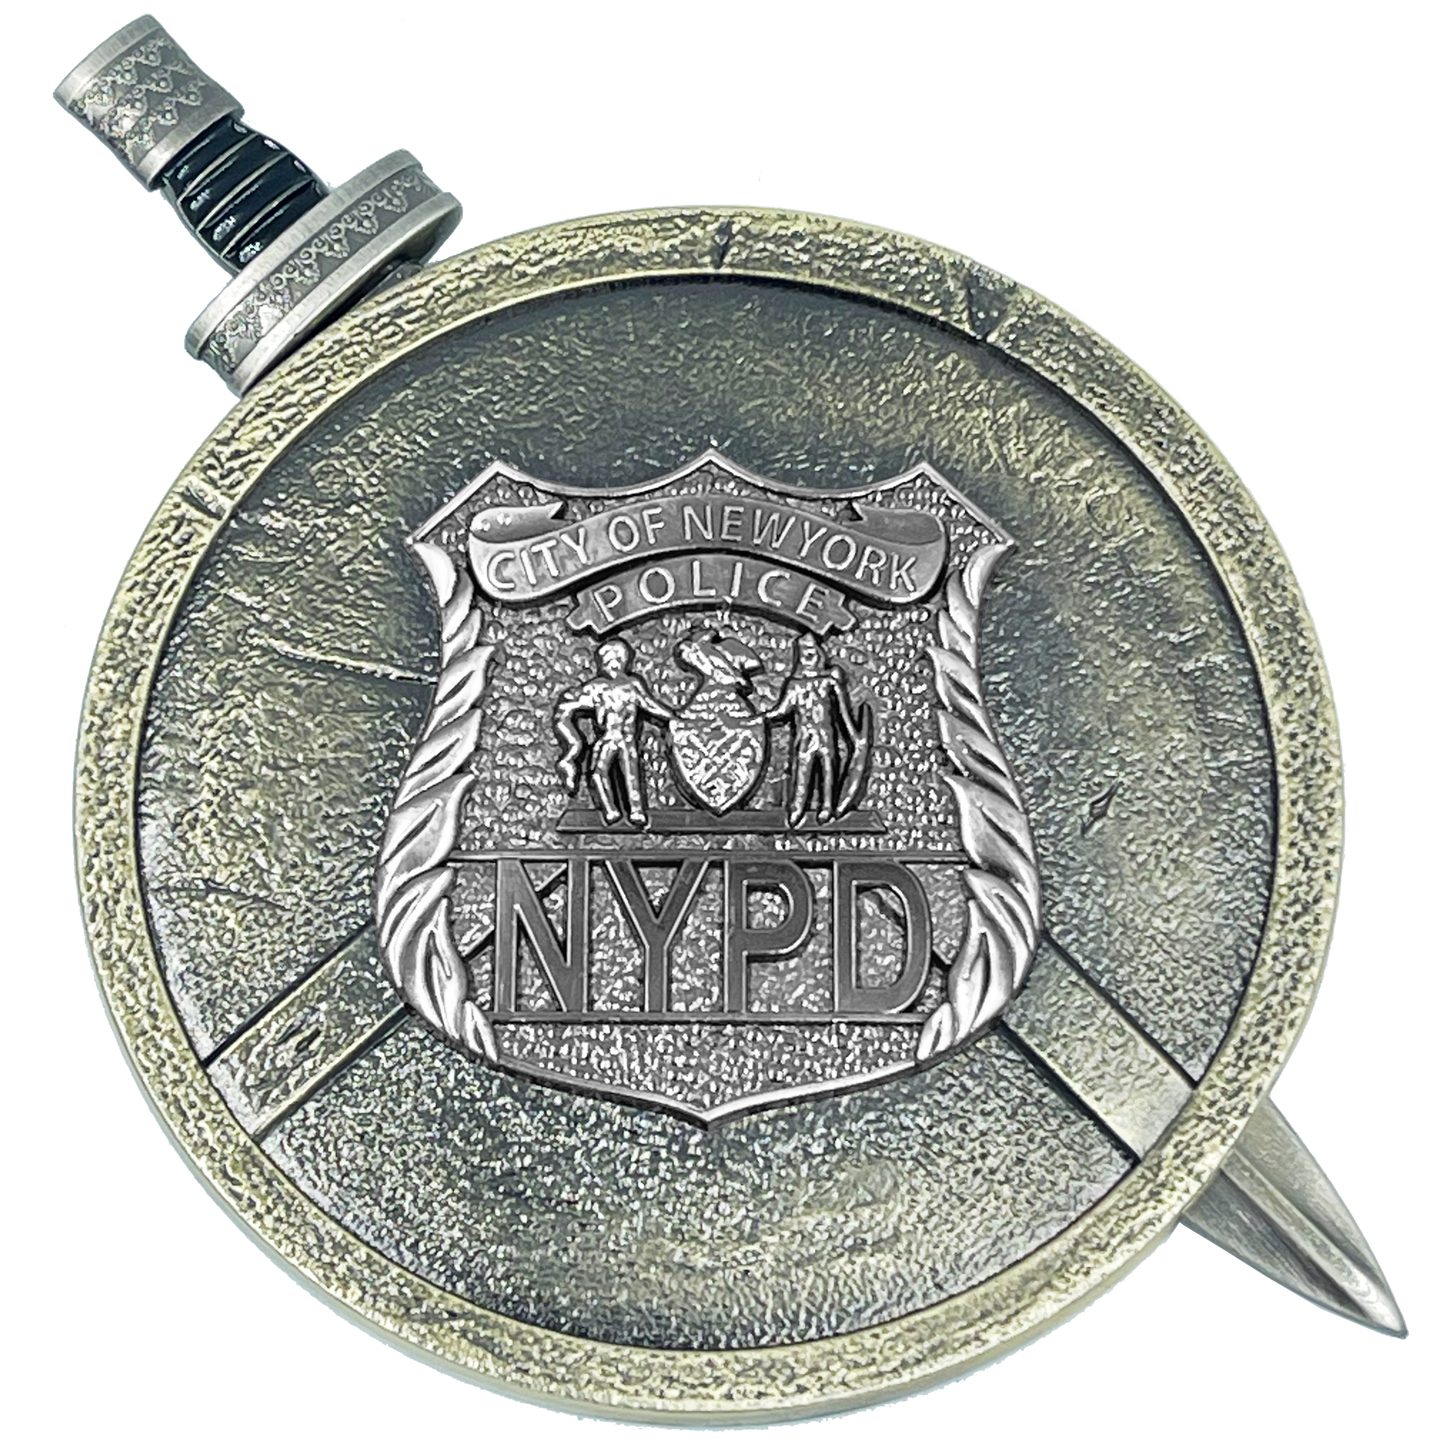 BL4-007 NYPD New York City Police Department Officer Shield with removable Sword Challenge Coin Set